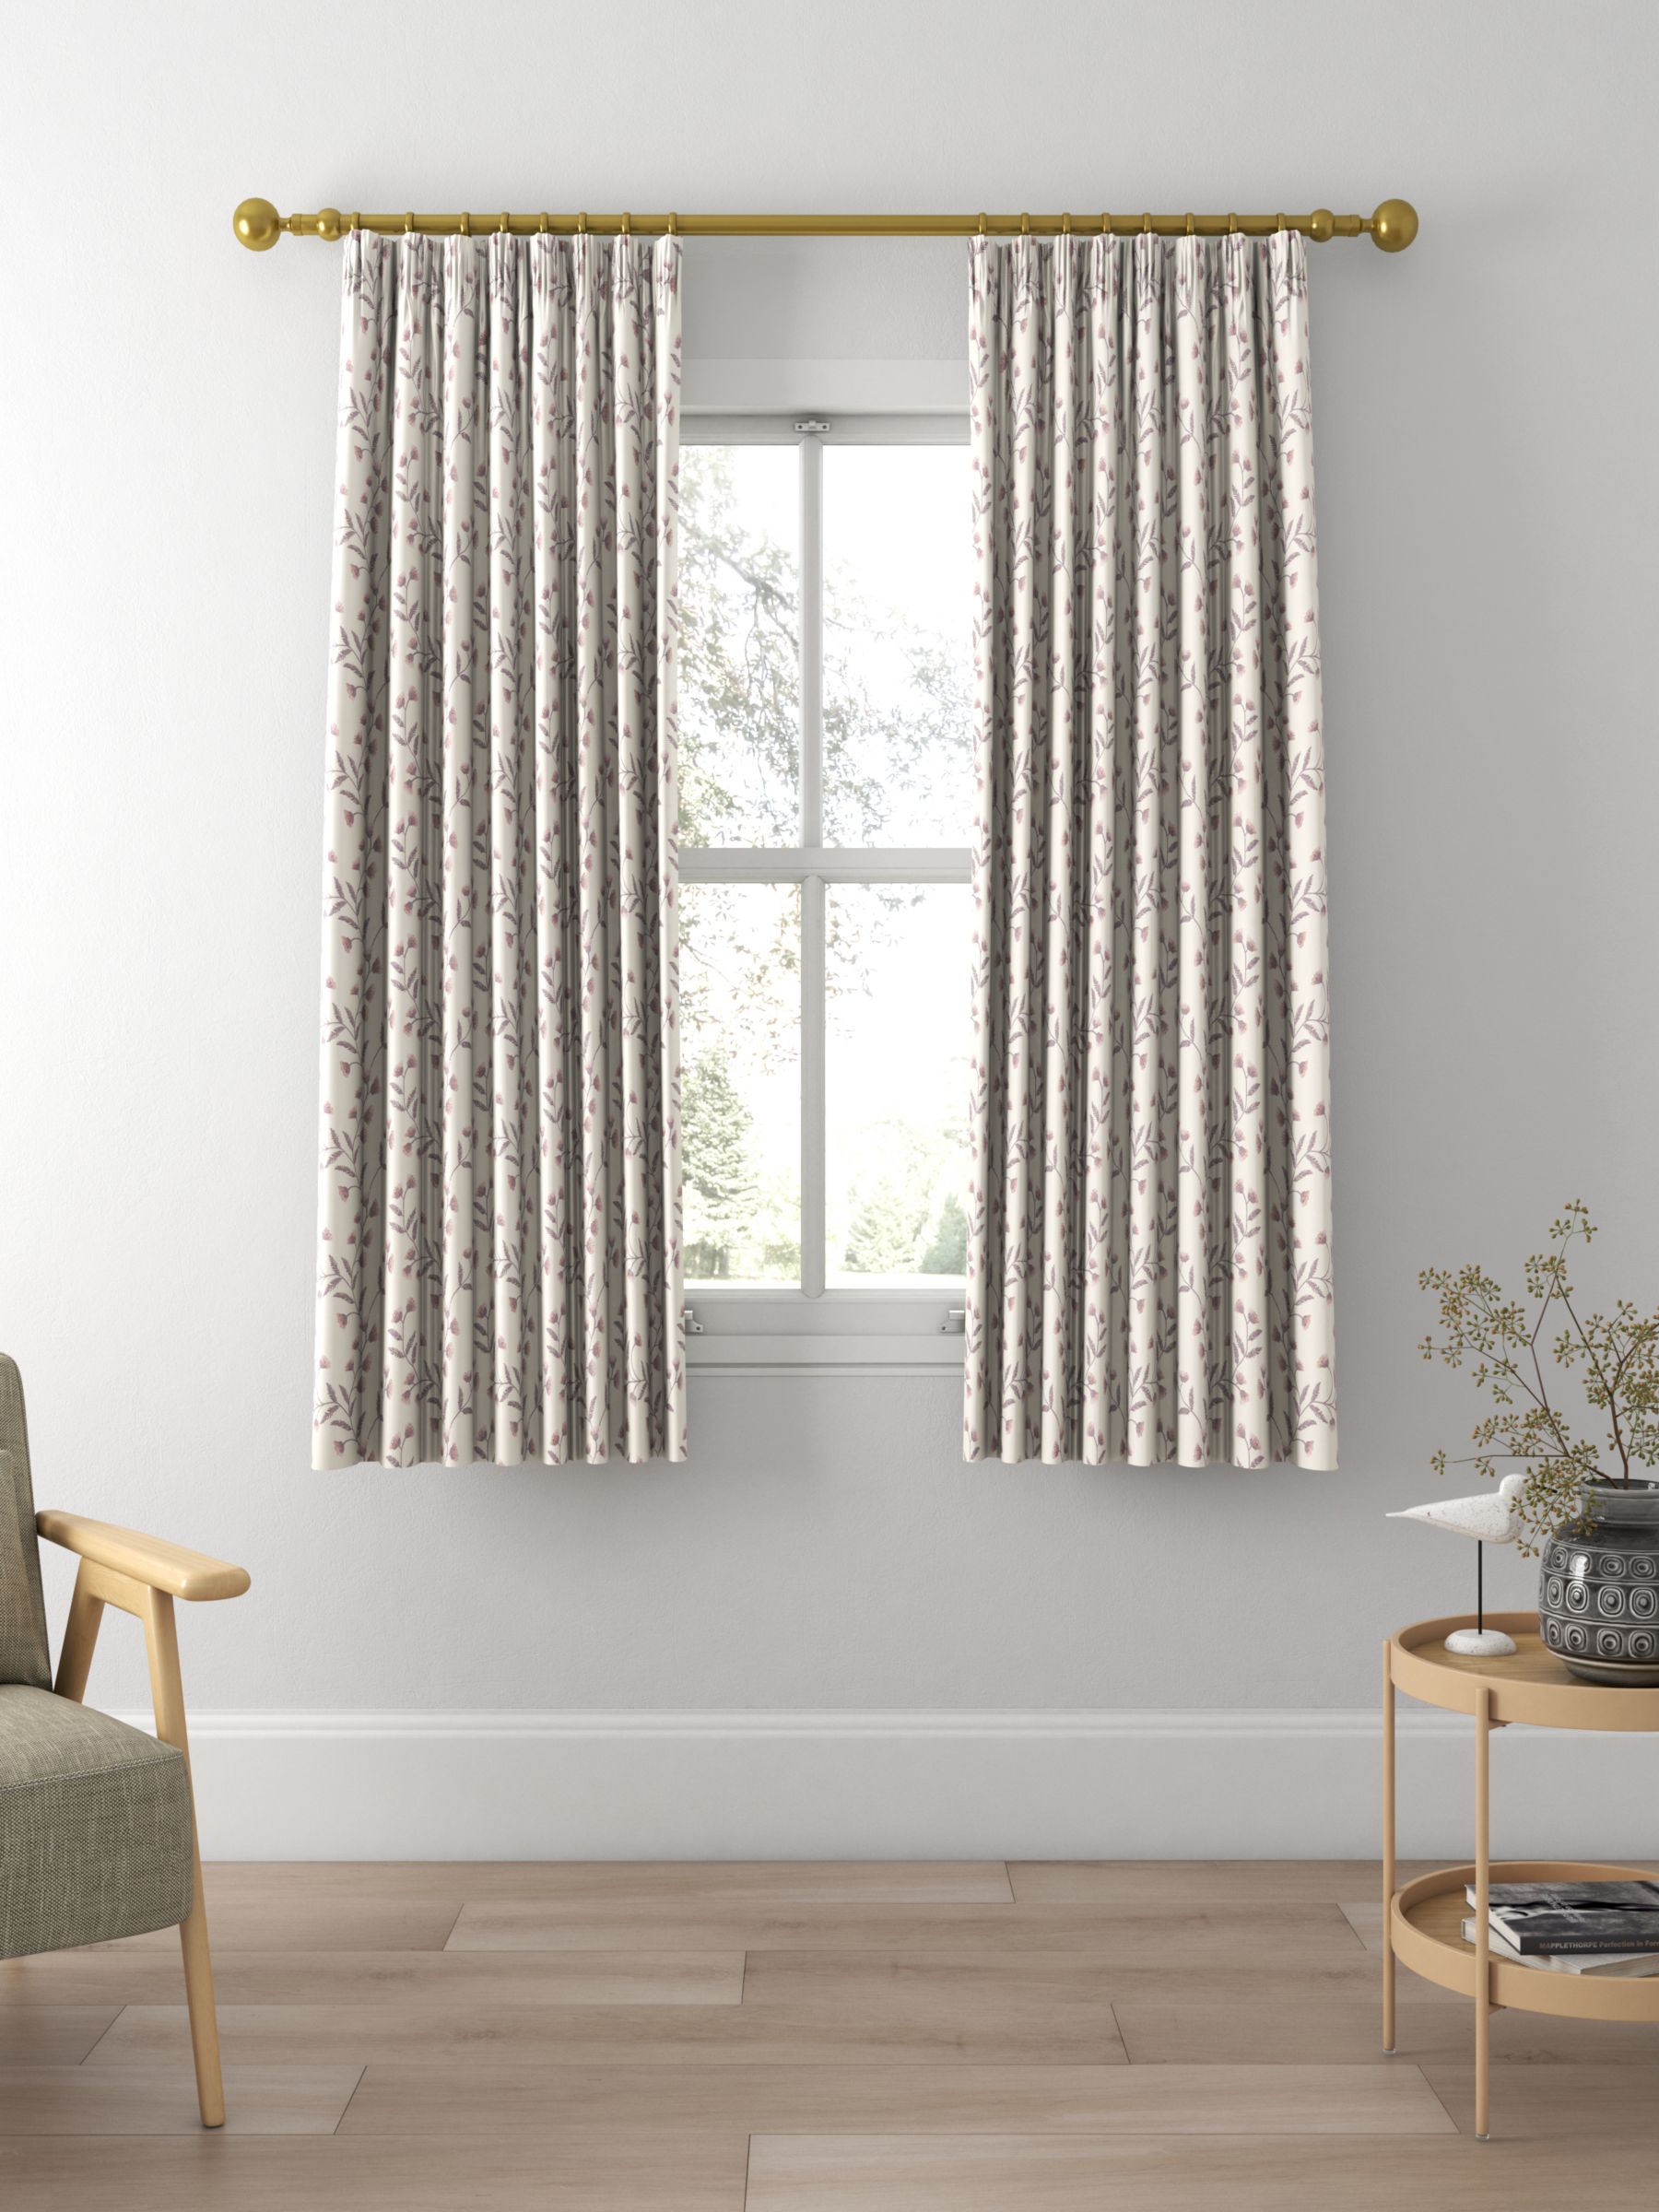 Sanderson Everly Made to Measure Curtains, Fig